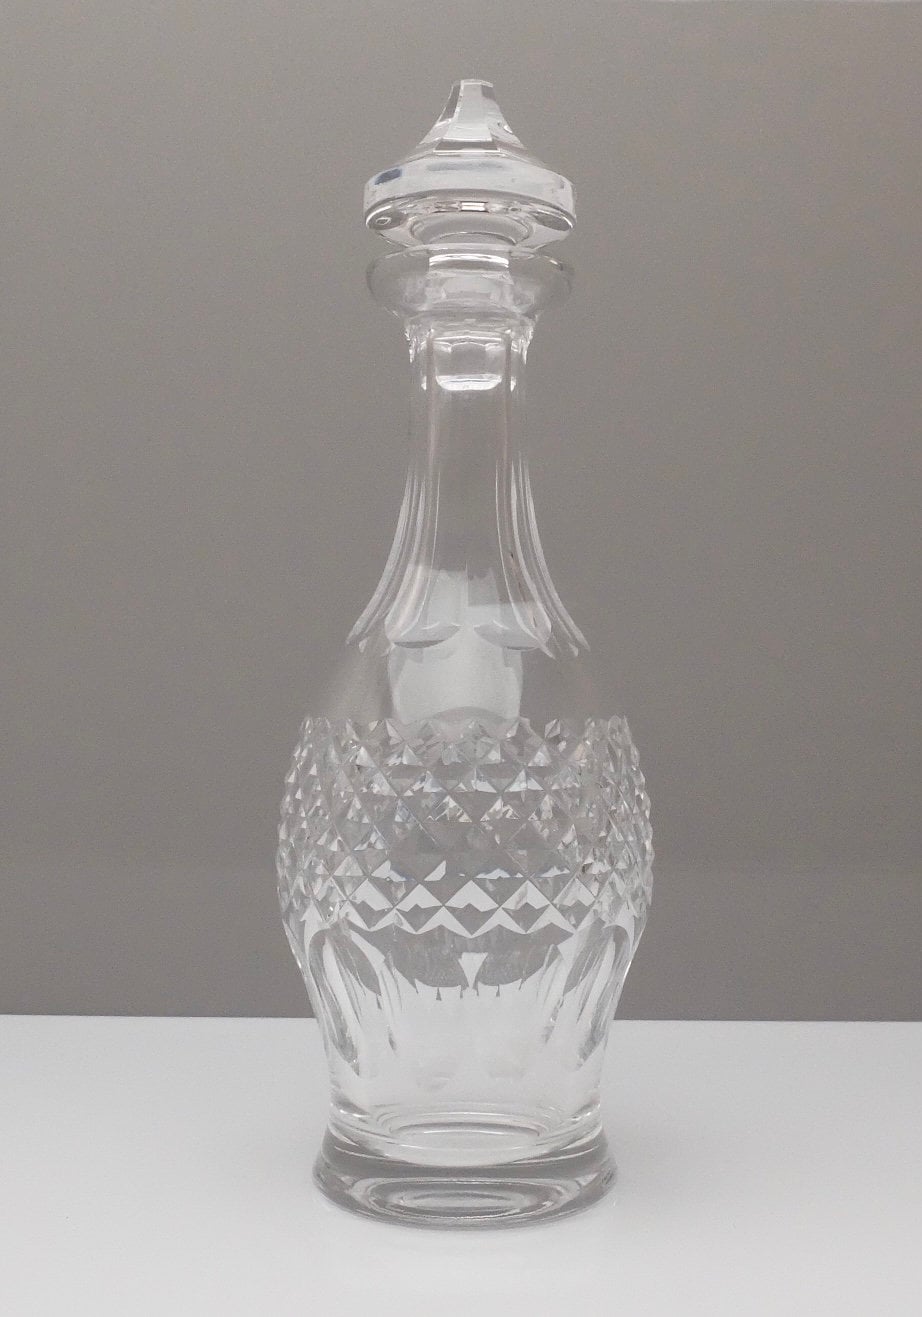 Waterford Crystal Colleen Decanter Vintage Brandy Decanter Ireland